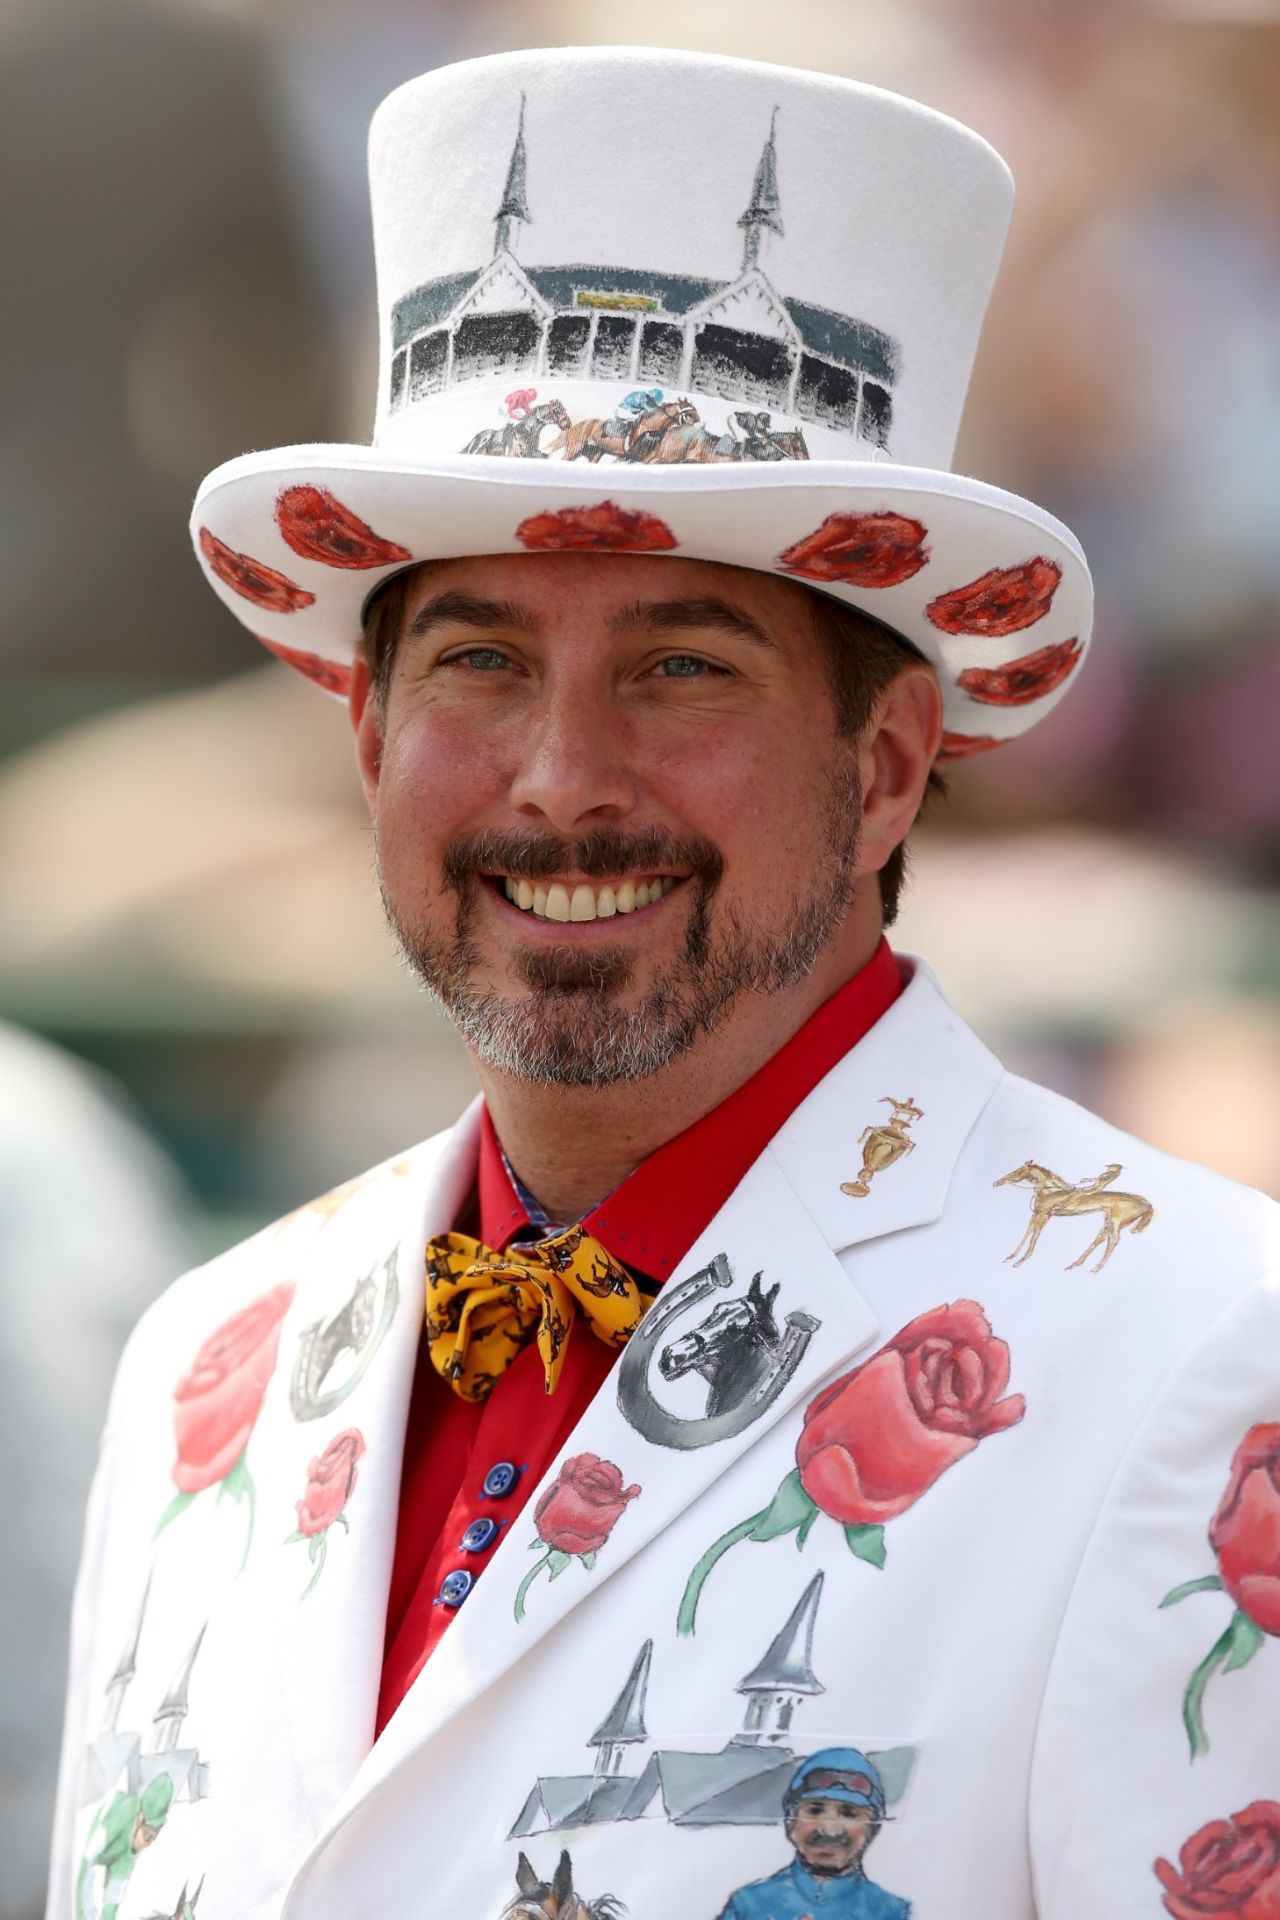 A race fan wearing a festive hat and suit attends the 140th running of the Kentucky Derby at Churchill Downs on May 3, 2014 in Louisville, Kentucky. 